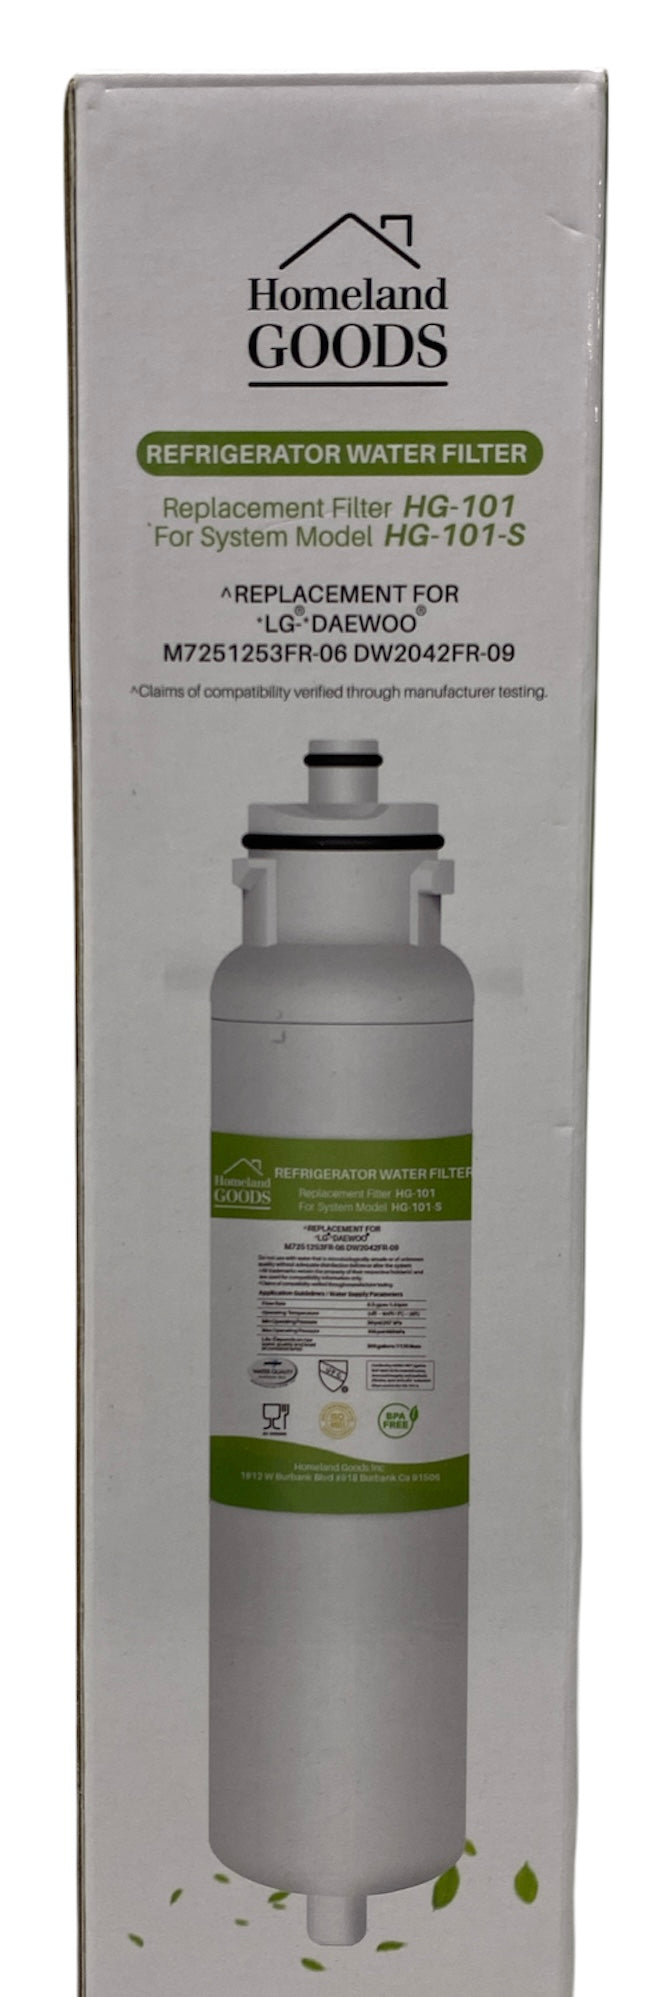 RWF1300A Refrigerator Water Filter IAPMO Certified Replacement for DW2042FR, 46-9130, DW2042FR-09, DW2042F-09, RWF1300A, EP-DW2042FR-09, FRN-Y22D2V, FRN-Y22D2W 469013 Refrigerator Water Filter